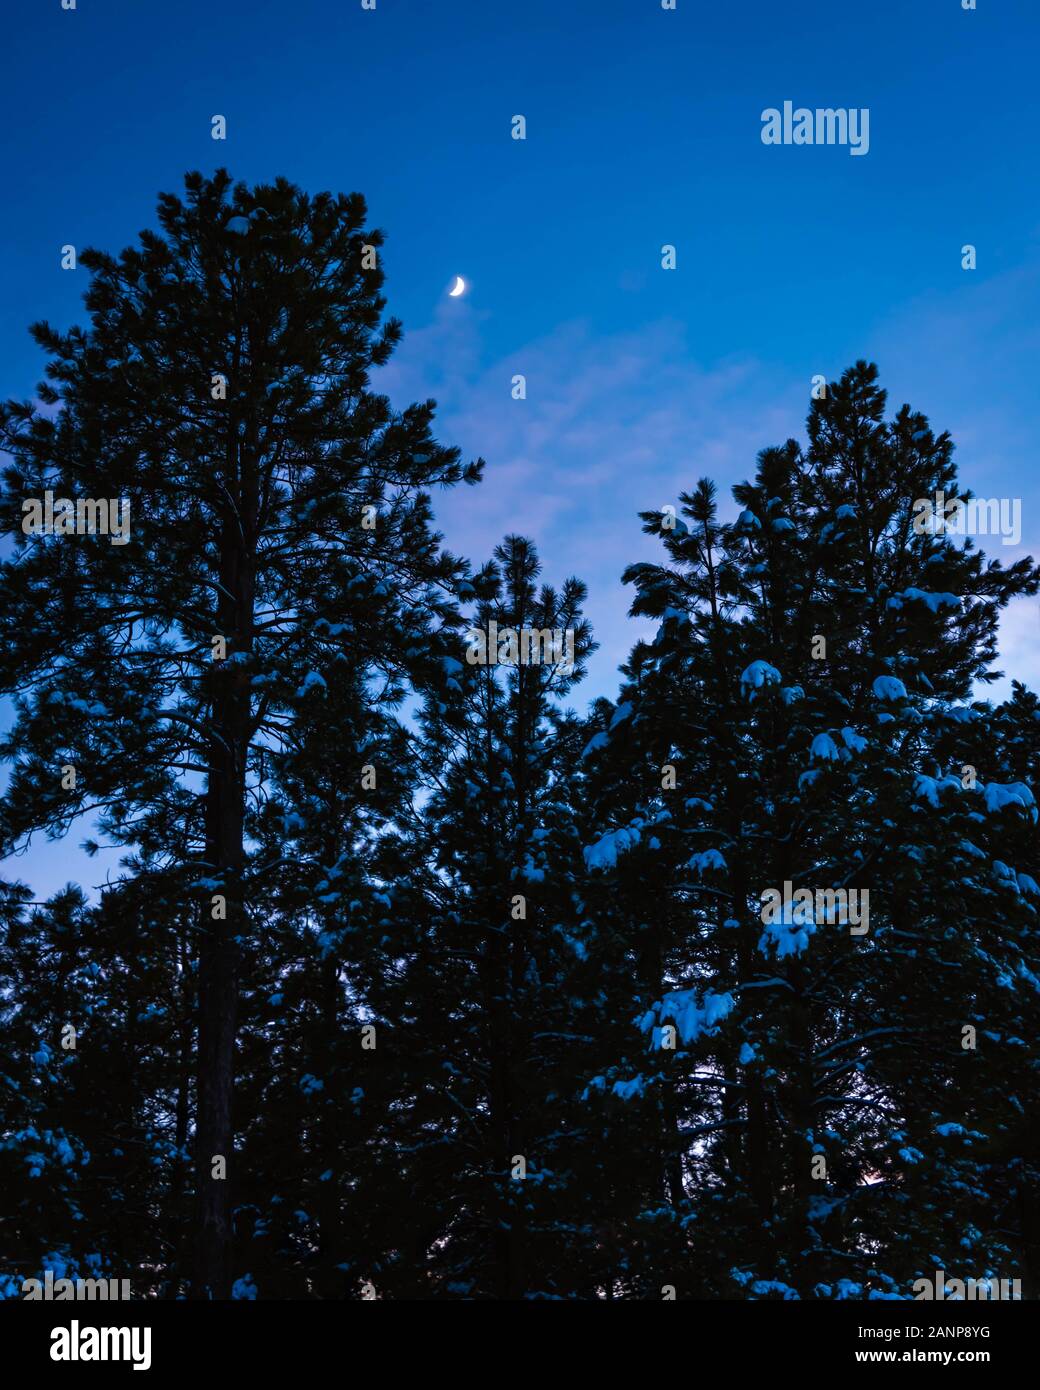 Winter scene during twilight hour at the forest with pine trees in silhouette, snow scattered through the tree branches, and a moon in the blue sky. Stock Photo